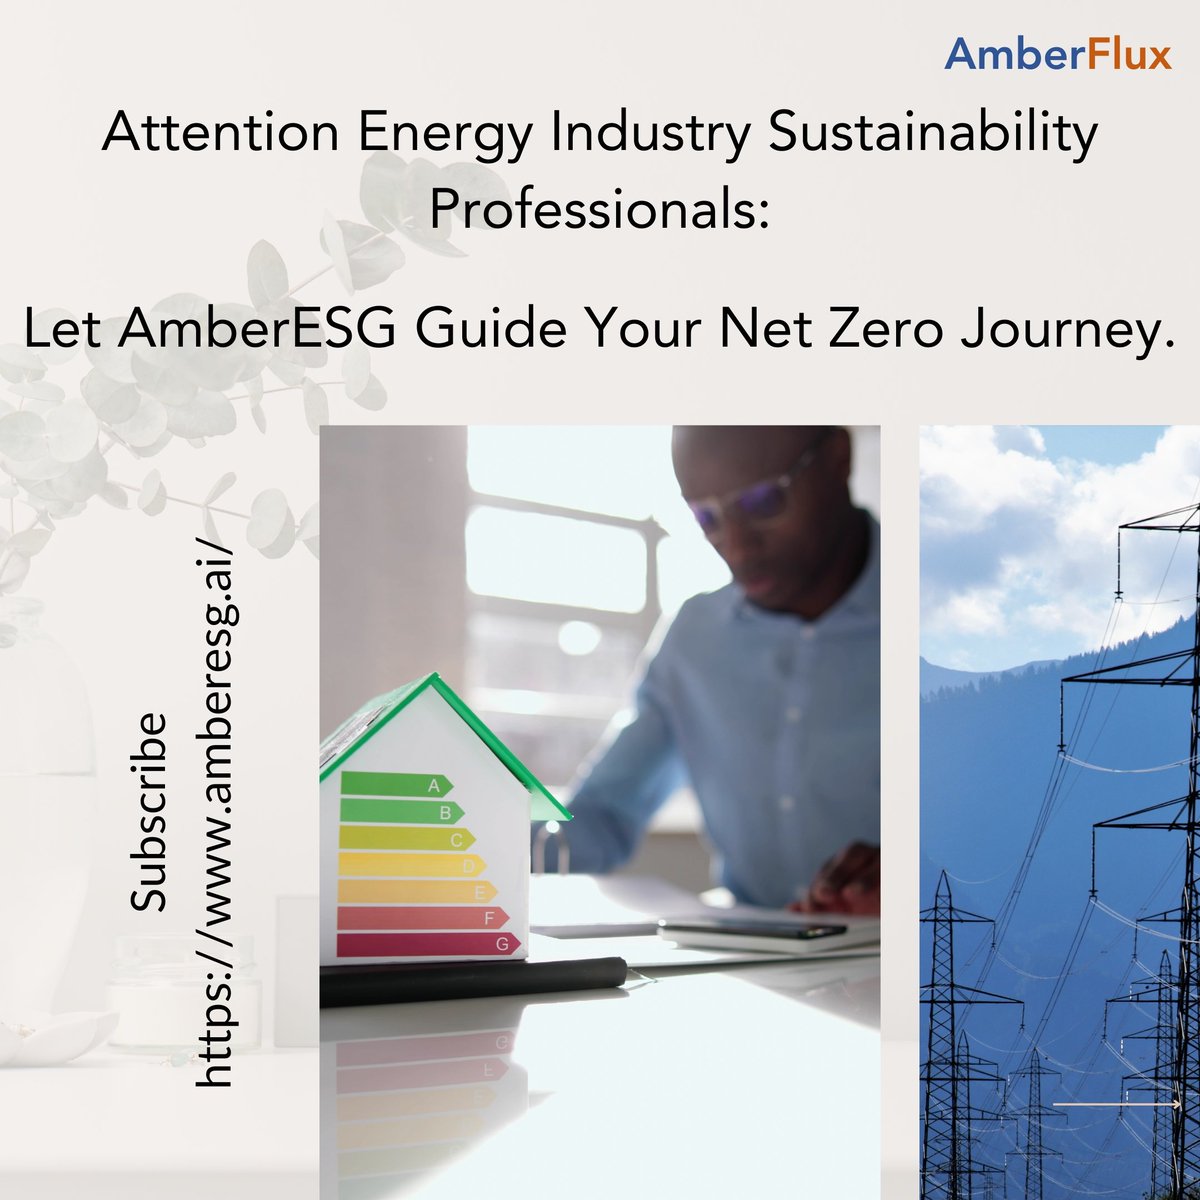 Are you charting a Sustainable course? Let AmberESG guide you with actionable ESG Insights.

Down the free ebook amberesg.ai/ebook

#ESG #energy #EnergyTransition #EnergyEfficiency #futureofenergy #energypolicy #climatechange #COP28 #Utility  #SustainableDevelopment